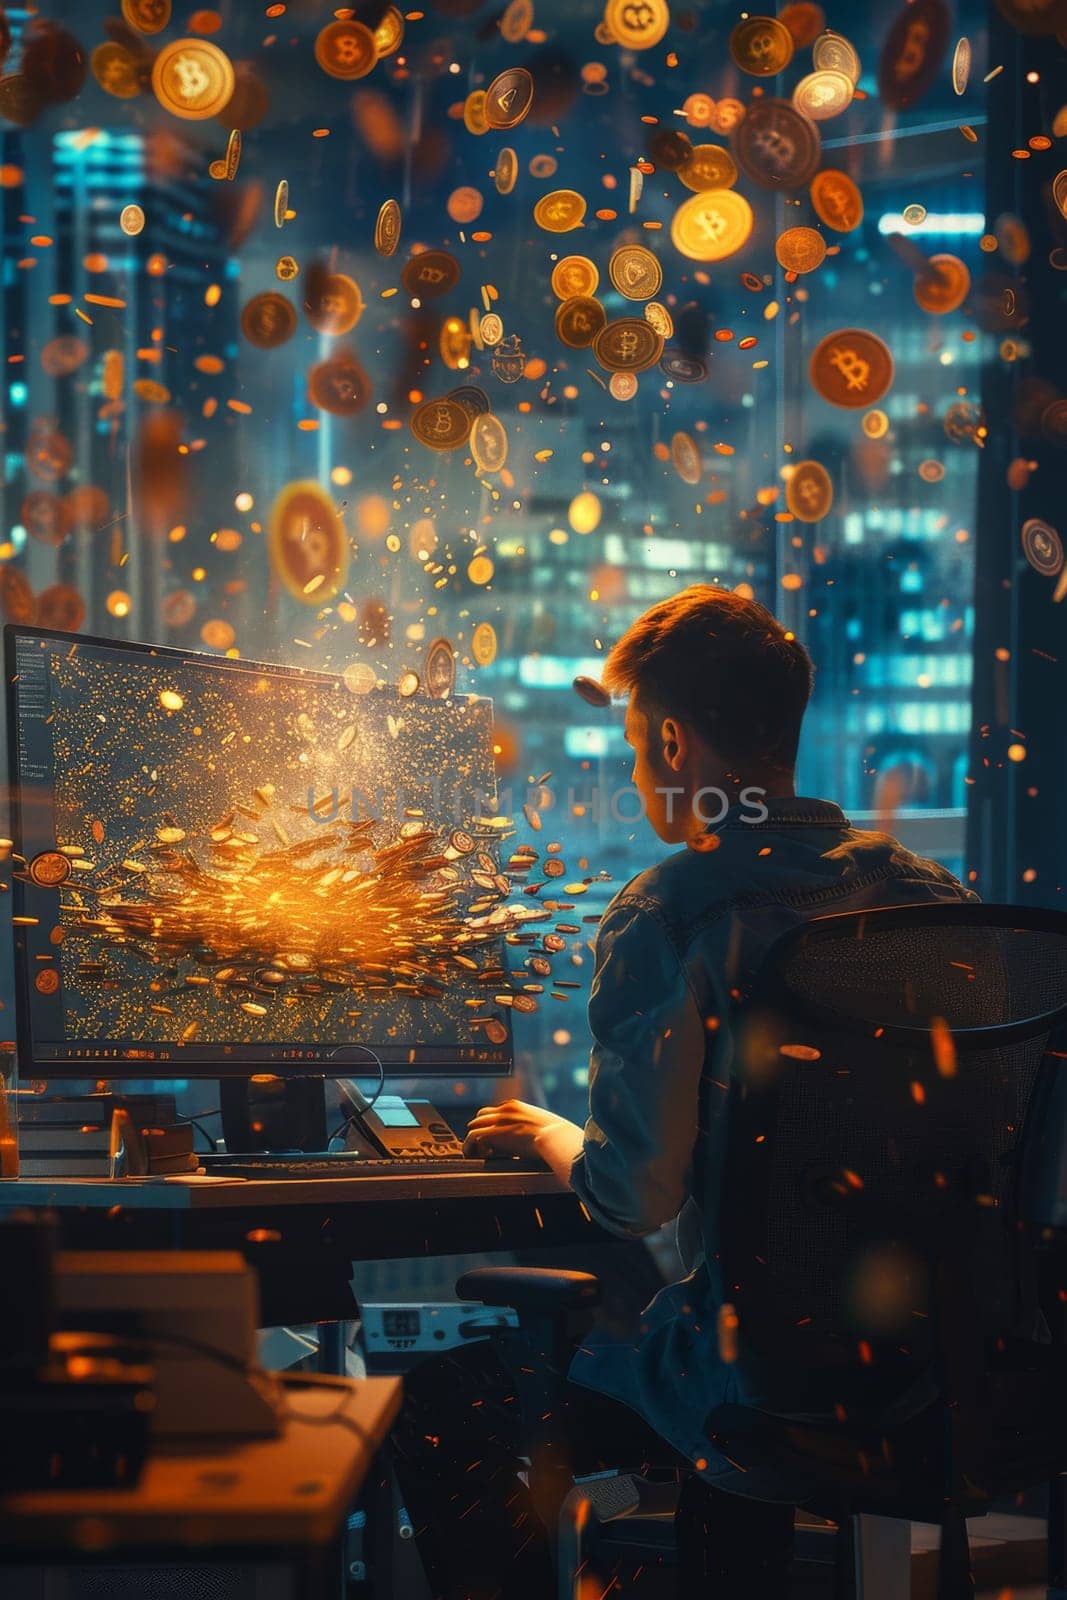 A man is sitting in front of a computer monitor with a coin on it. He is wearing a black hoodie and glasses. Concept of focus and concentration as the man works on his computer